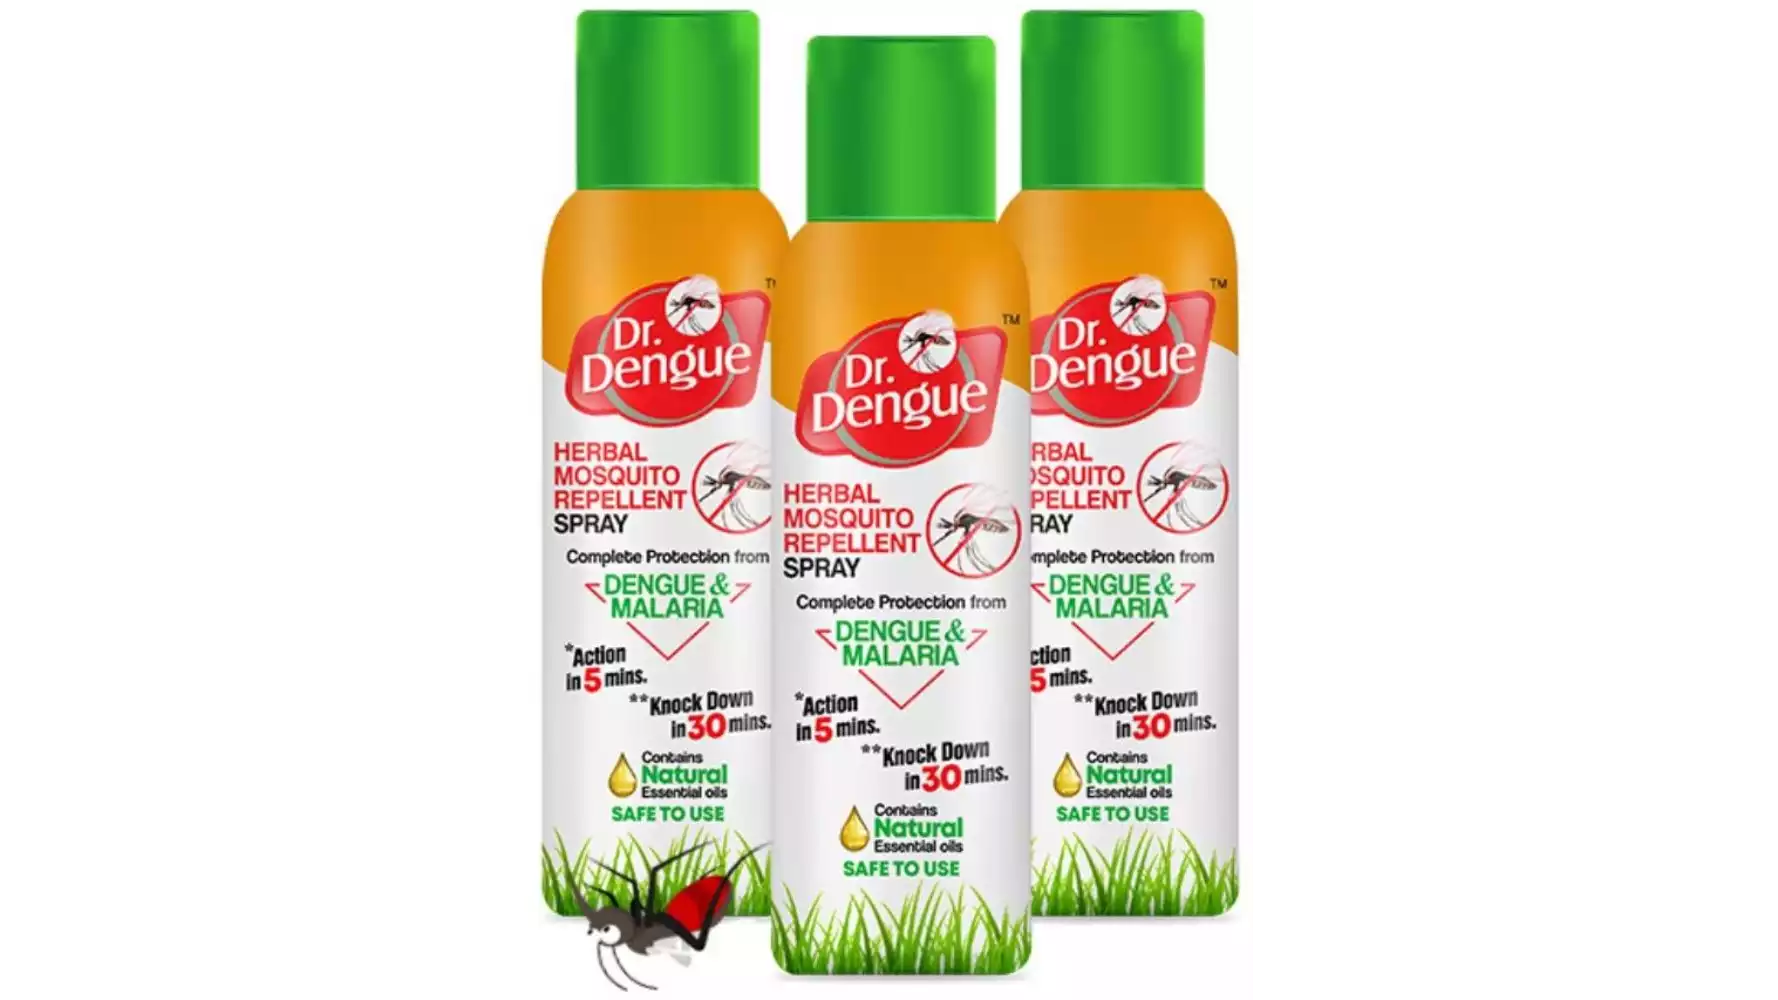 Dr. Dengue Herbal Mosquito Repellent Spray (50g, Pack of 3)